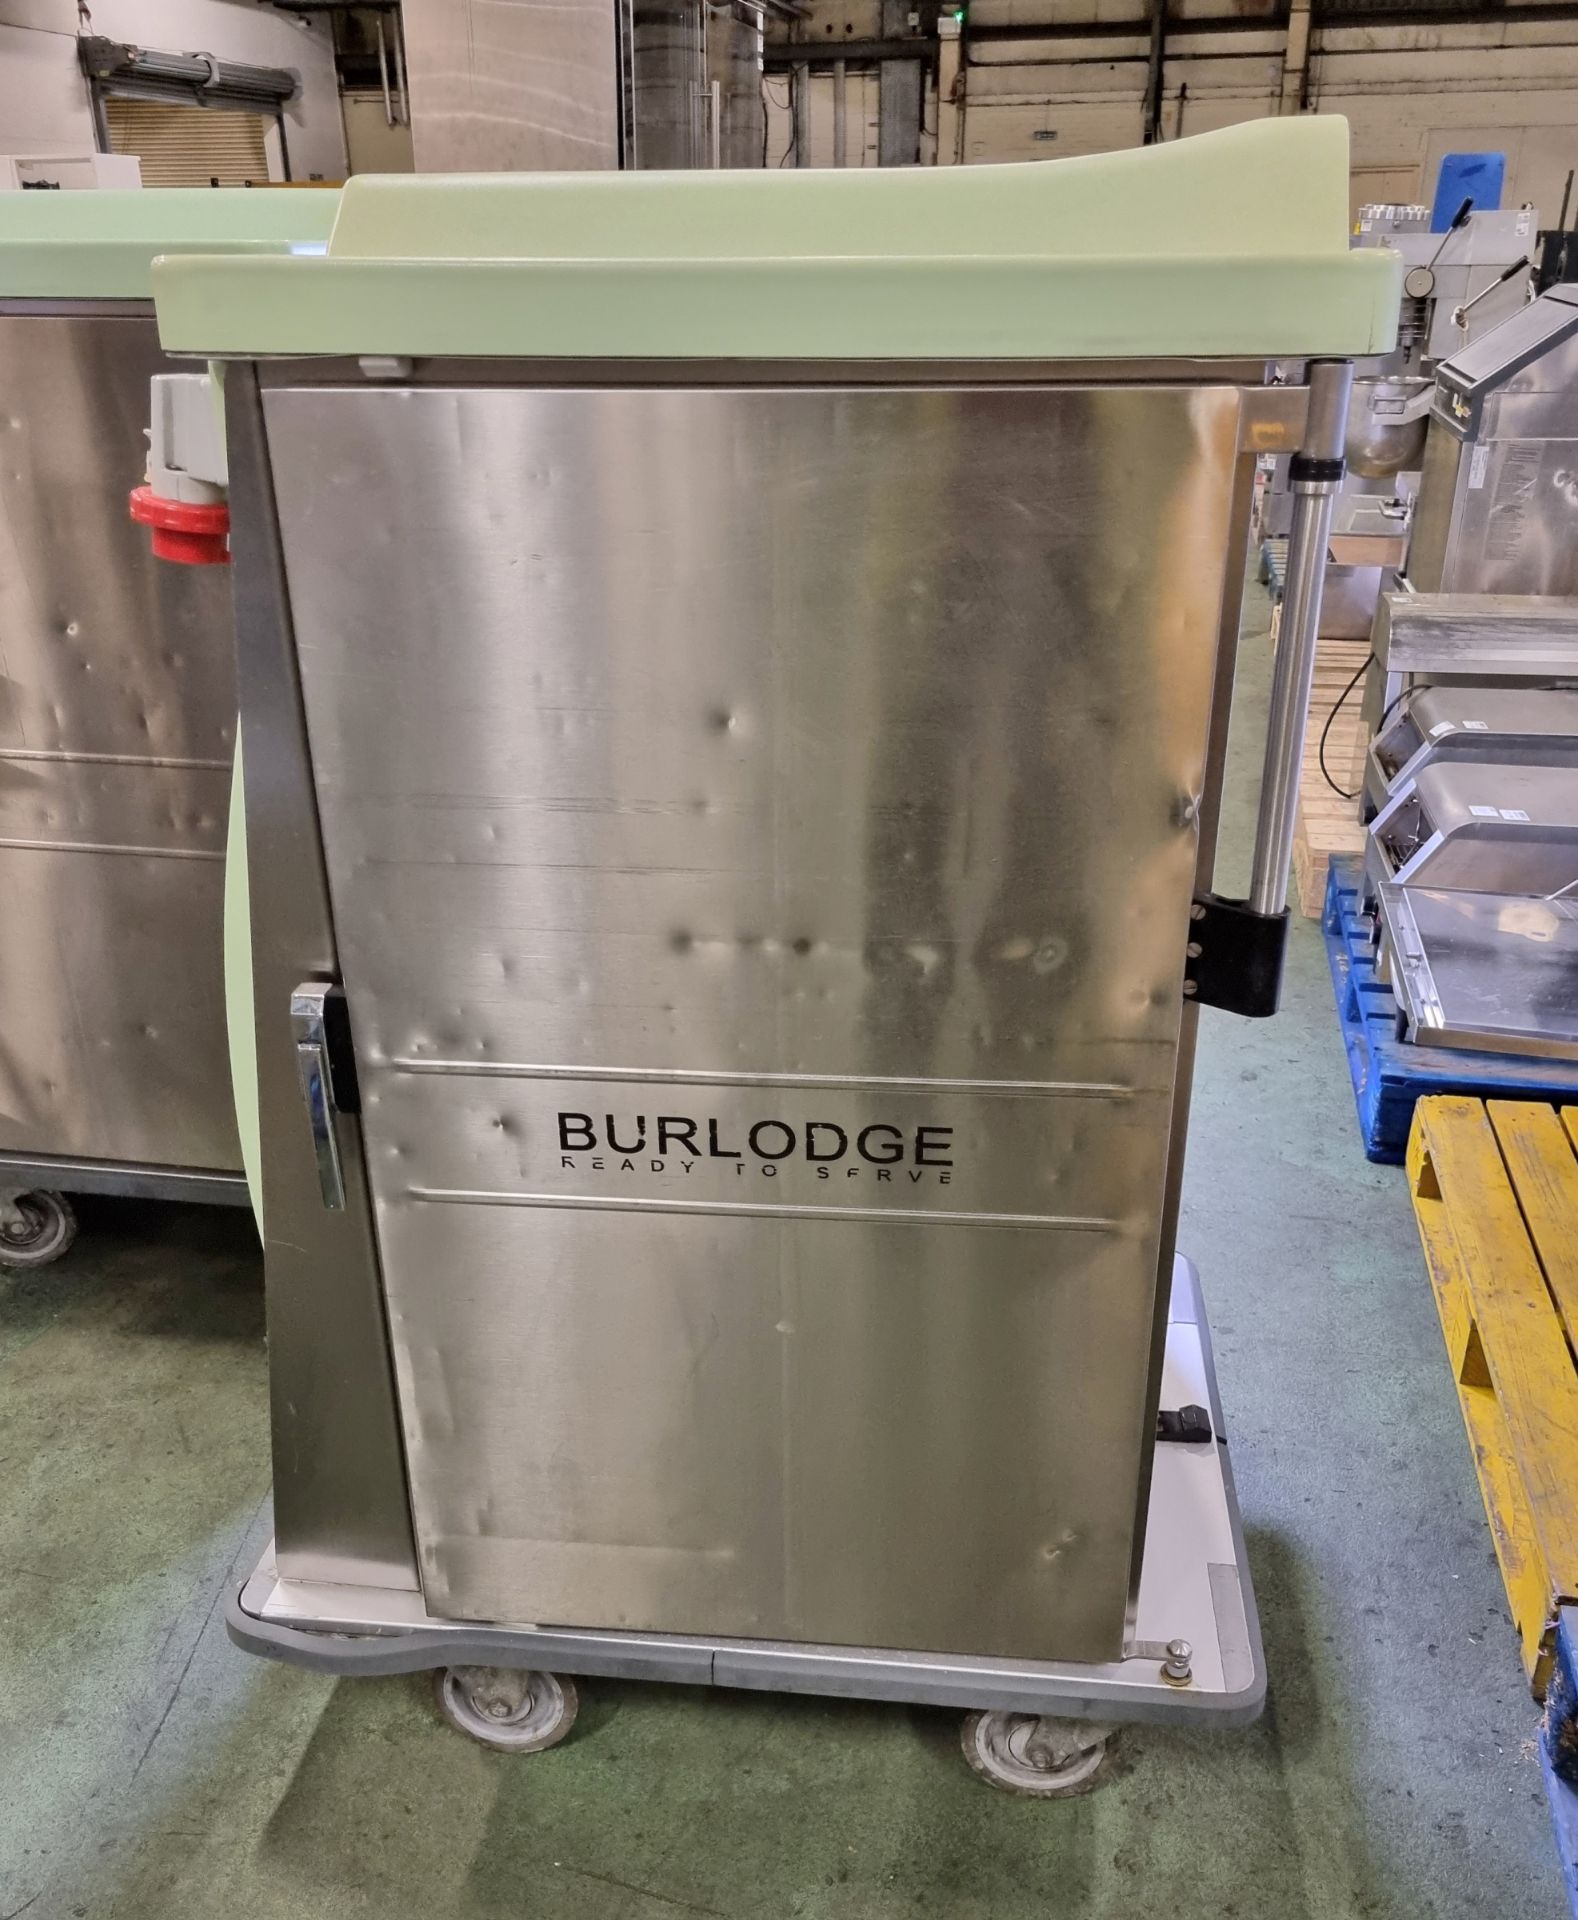 Burlodge RTS hot and cold tray delivery trolley - opens boths sides - W 800 x D 1100 x H 1500mm - Image 6 of 6